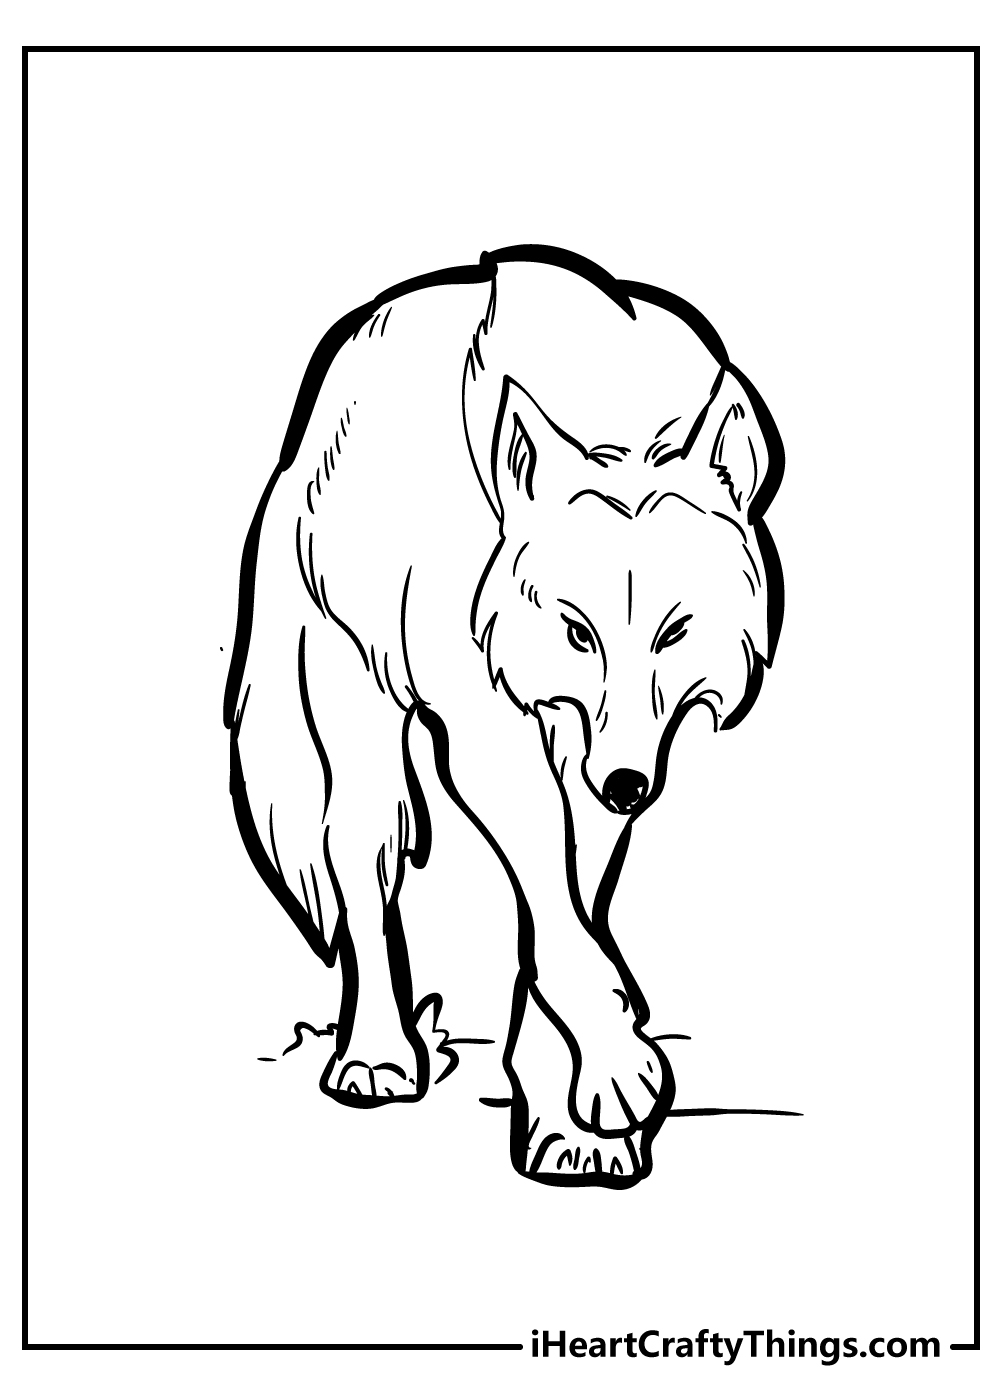 35 Wolf Coloring Pages - All New And Updated (2022)